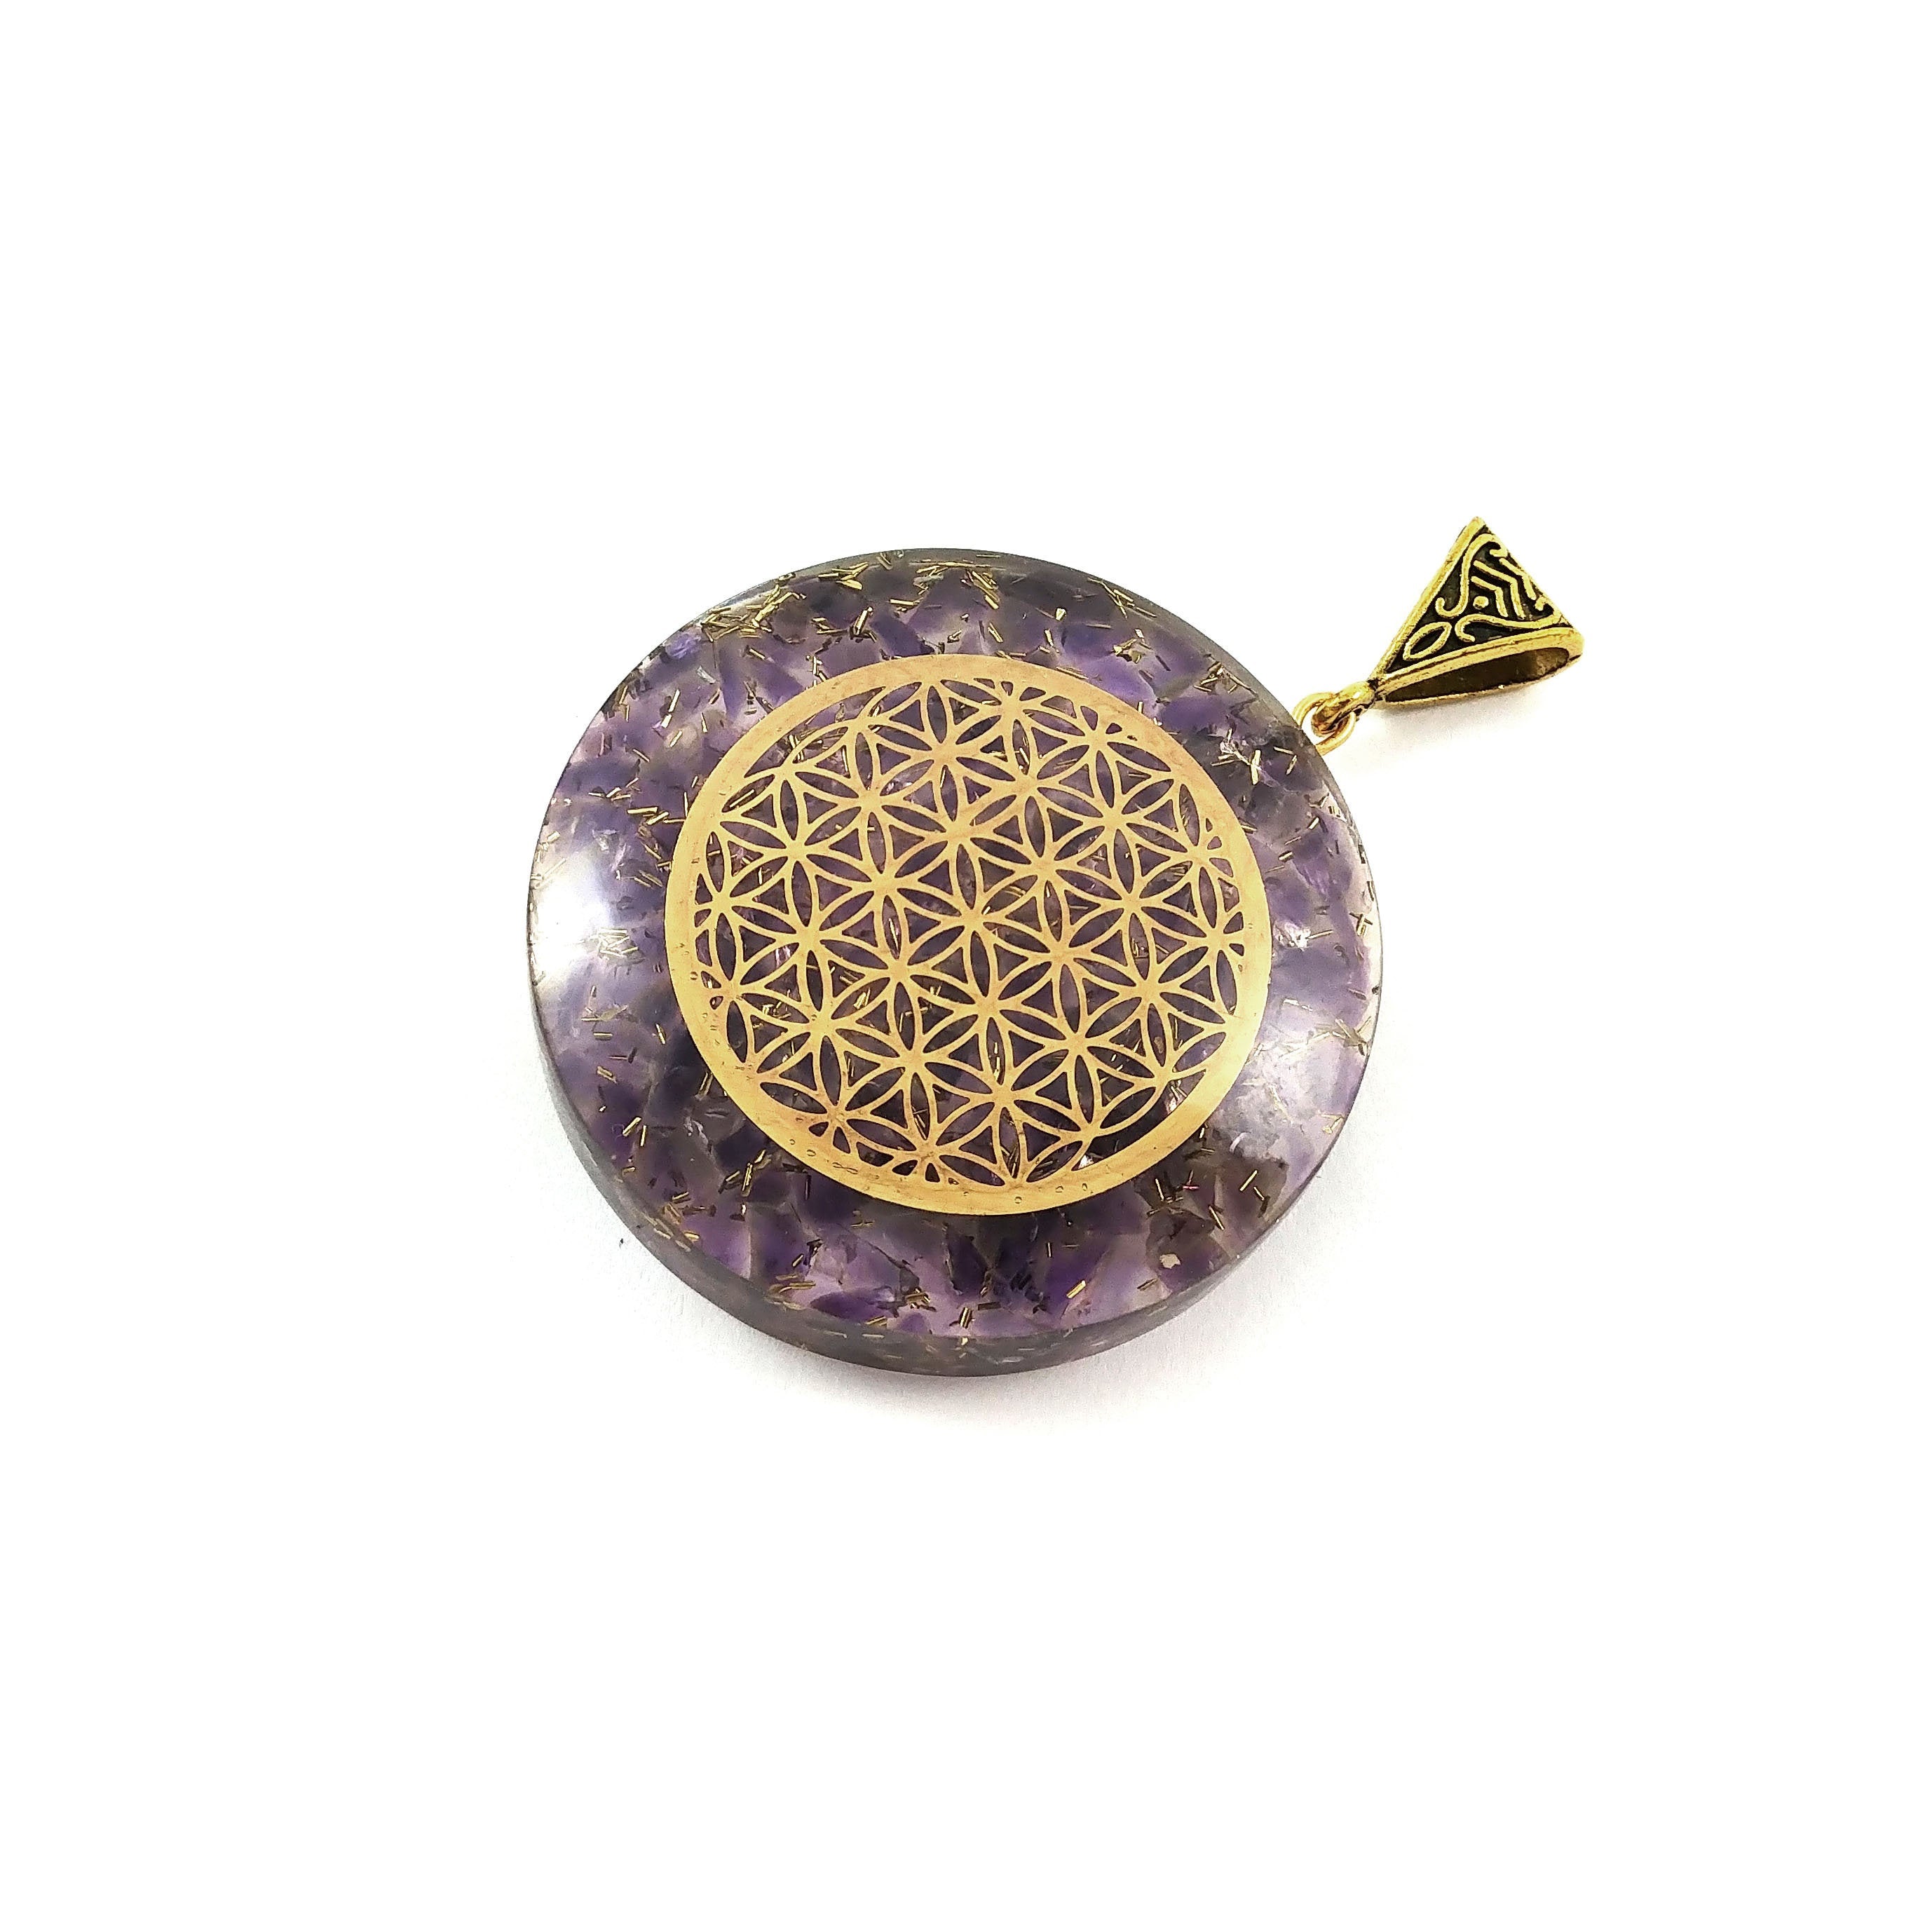 Round stone orgonite pendant with Flower of life